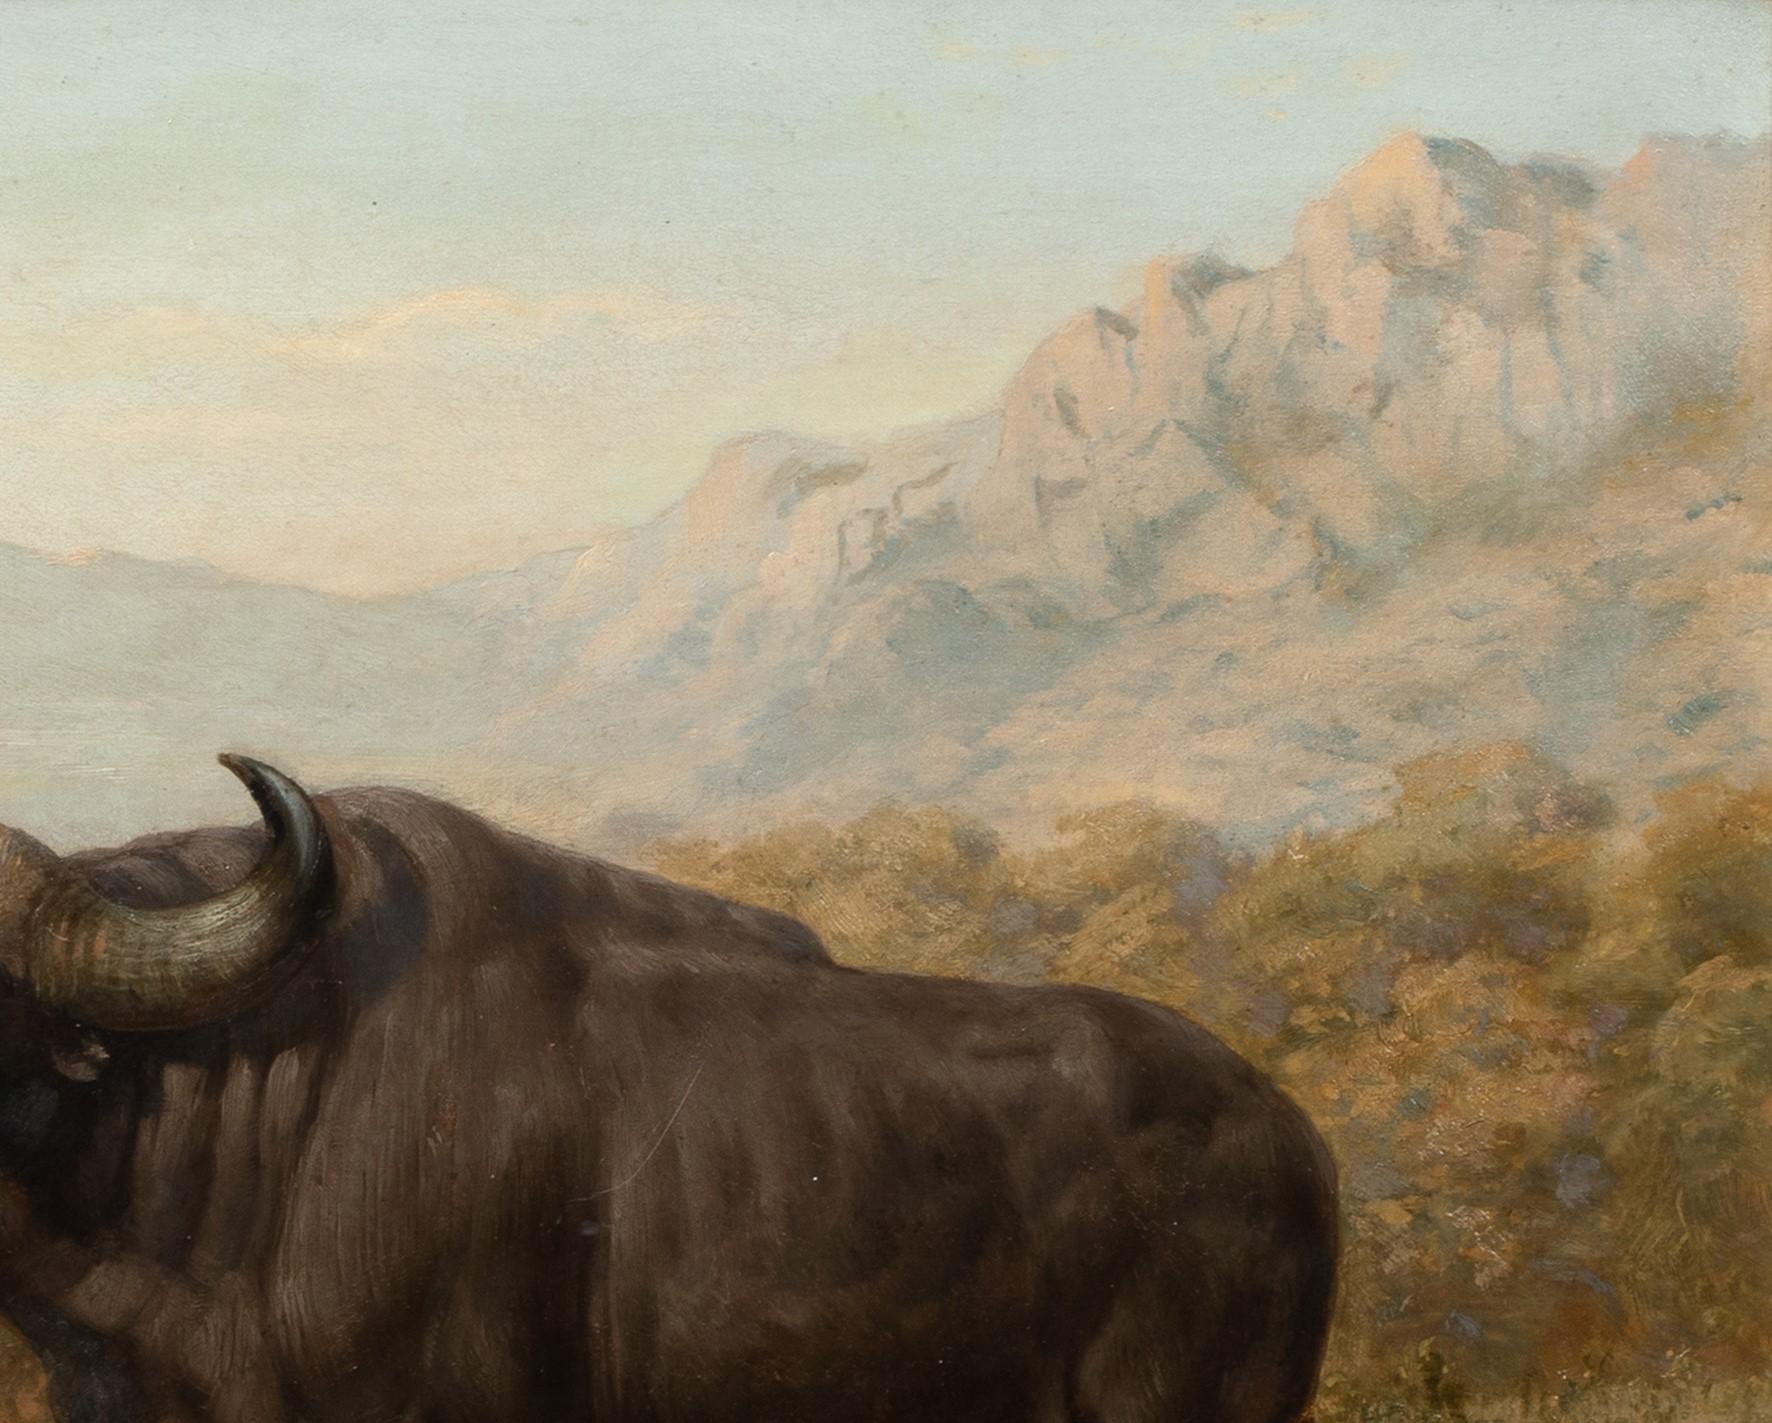 A Study Of Bison, 19th century  - Painting by Joseph Wolf